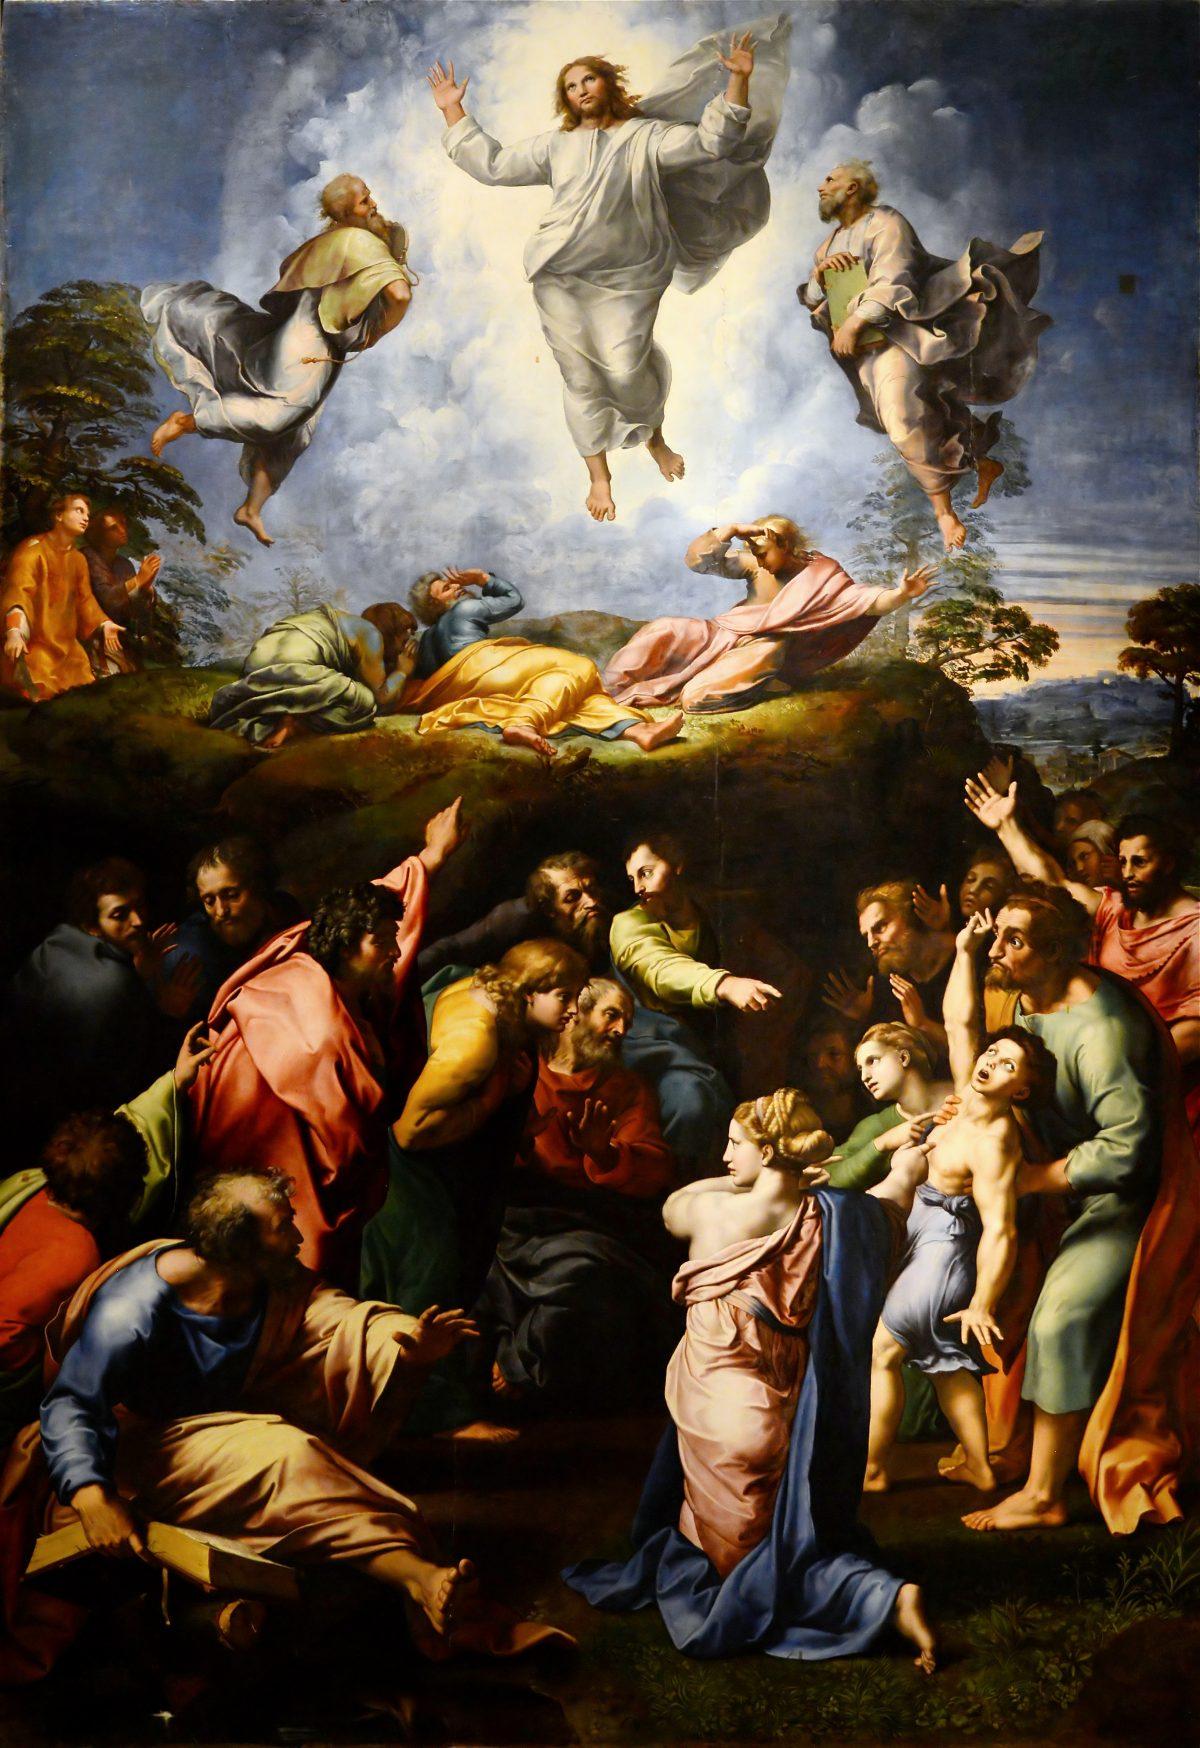 “The Transfiguration,” 1520, by Raphael, in the Pinacoteca Vaticana. (CC BY-SA 4.0)